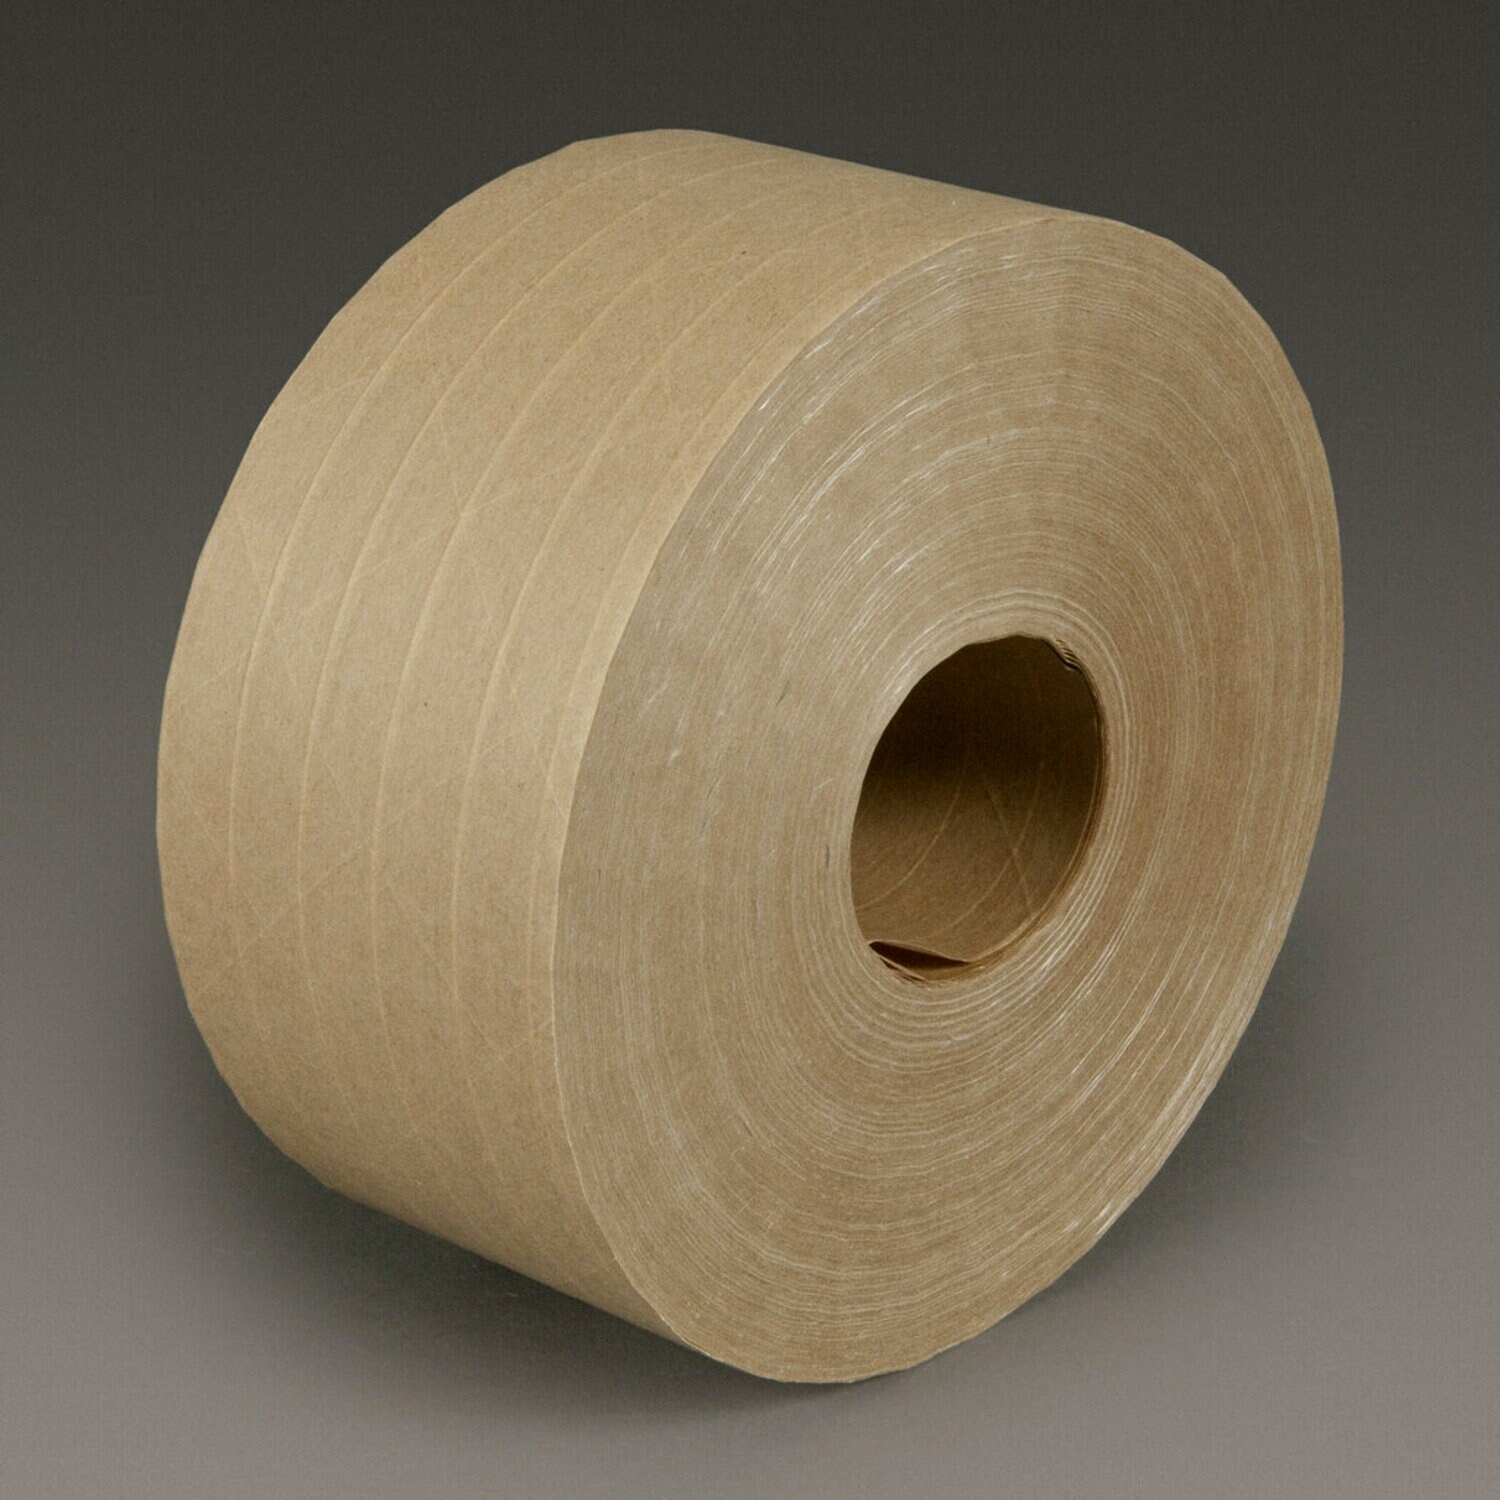 7010374914 - 3M Water Activated Paper Tape 6146, Natural, Medium Duty Reinforced, 6
in x 4500 ft, Pallet Pack